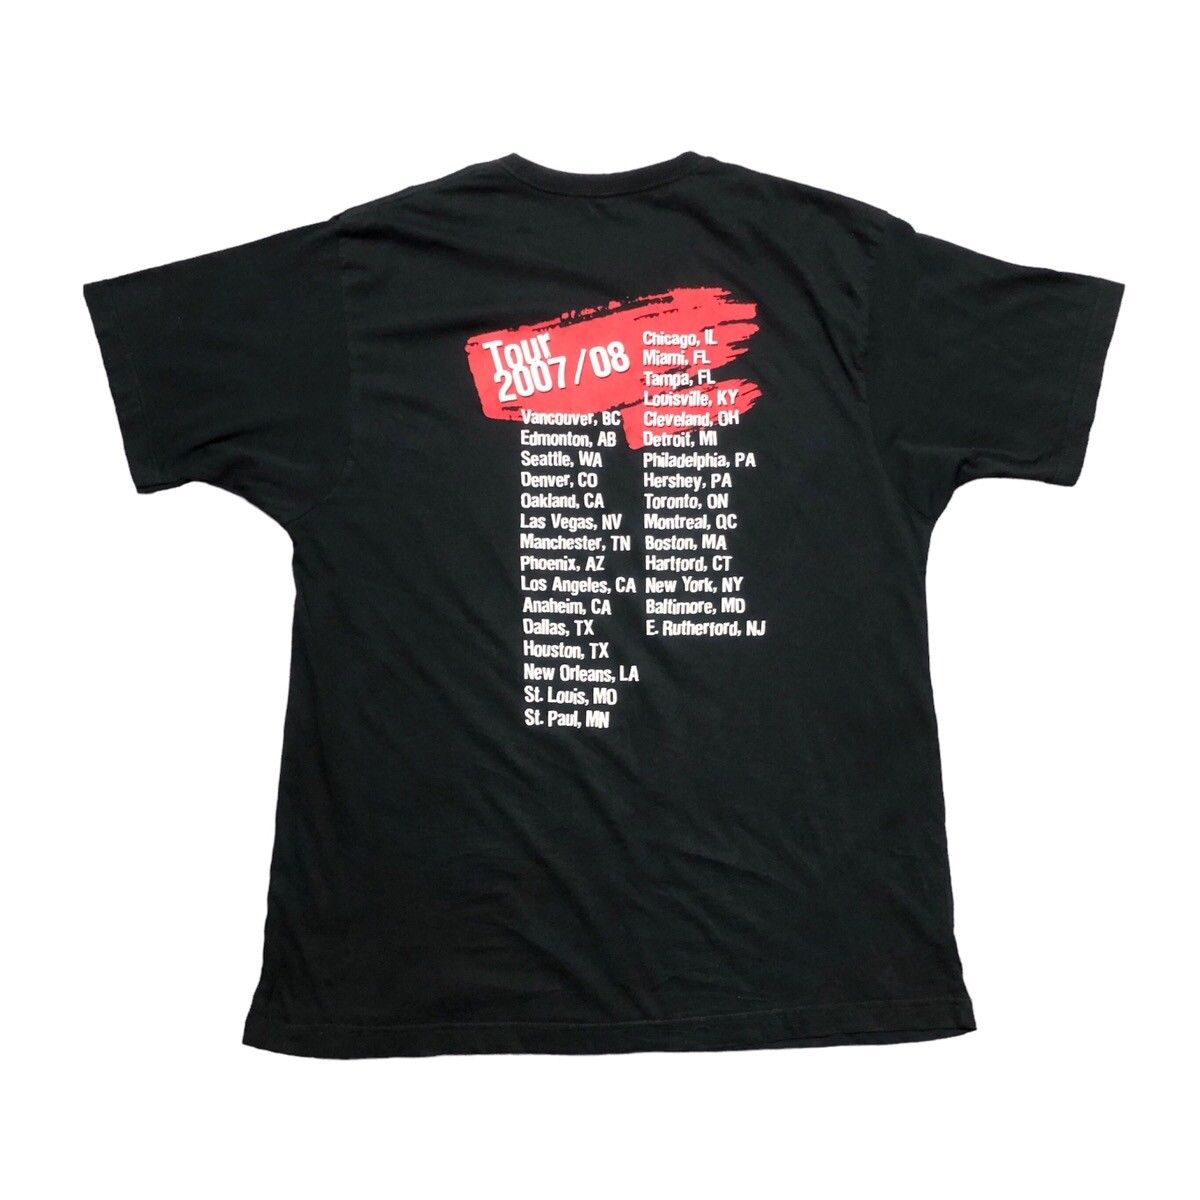 Anvil - The Police 2007-08 American Tour Tshirt - 2